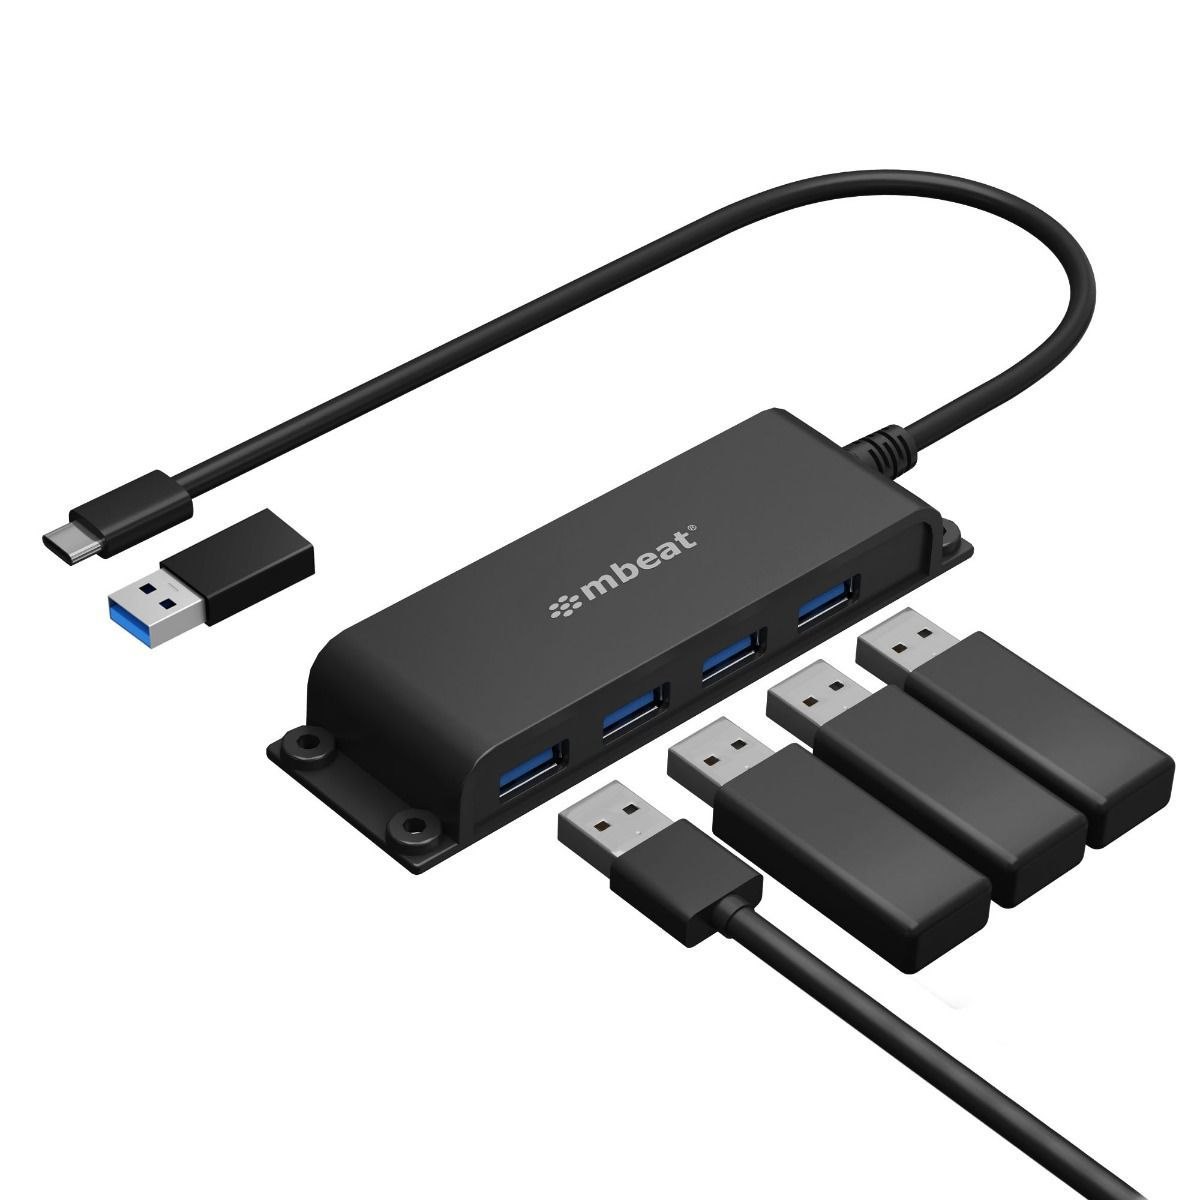 Mbeat® Mountable 4-Port Usb-A & Usb-C Adapter Hub - 60CM Data Cable, Usb 3.0, 2.0 High-Speed Data Port Expansion, Save Space Mounting Solution